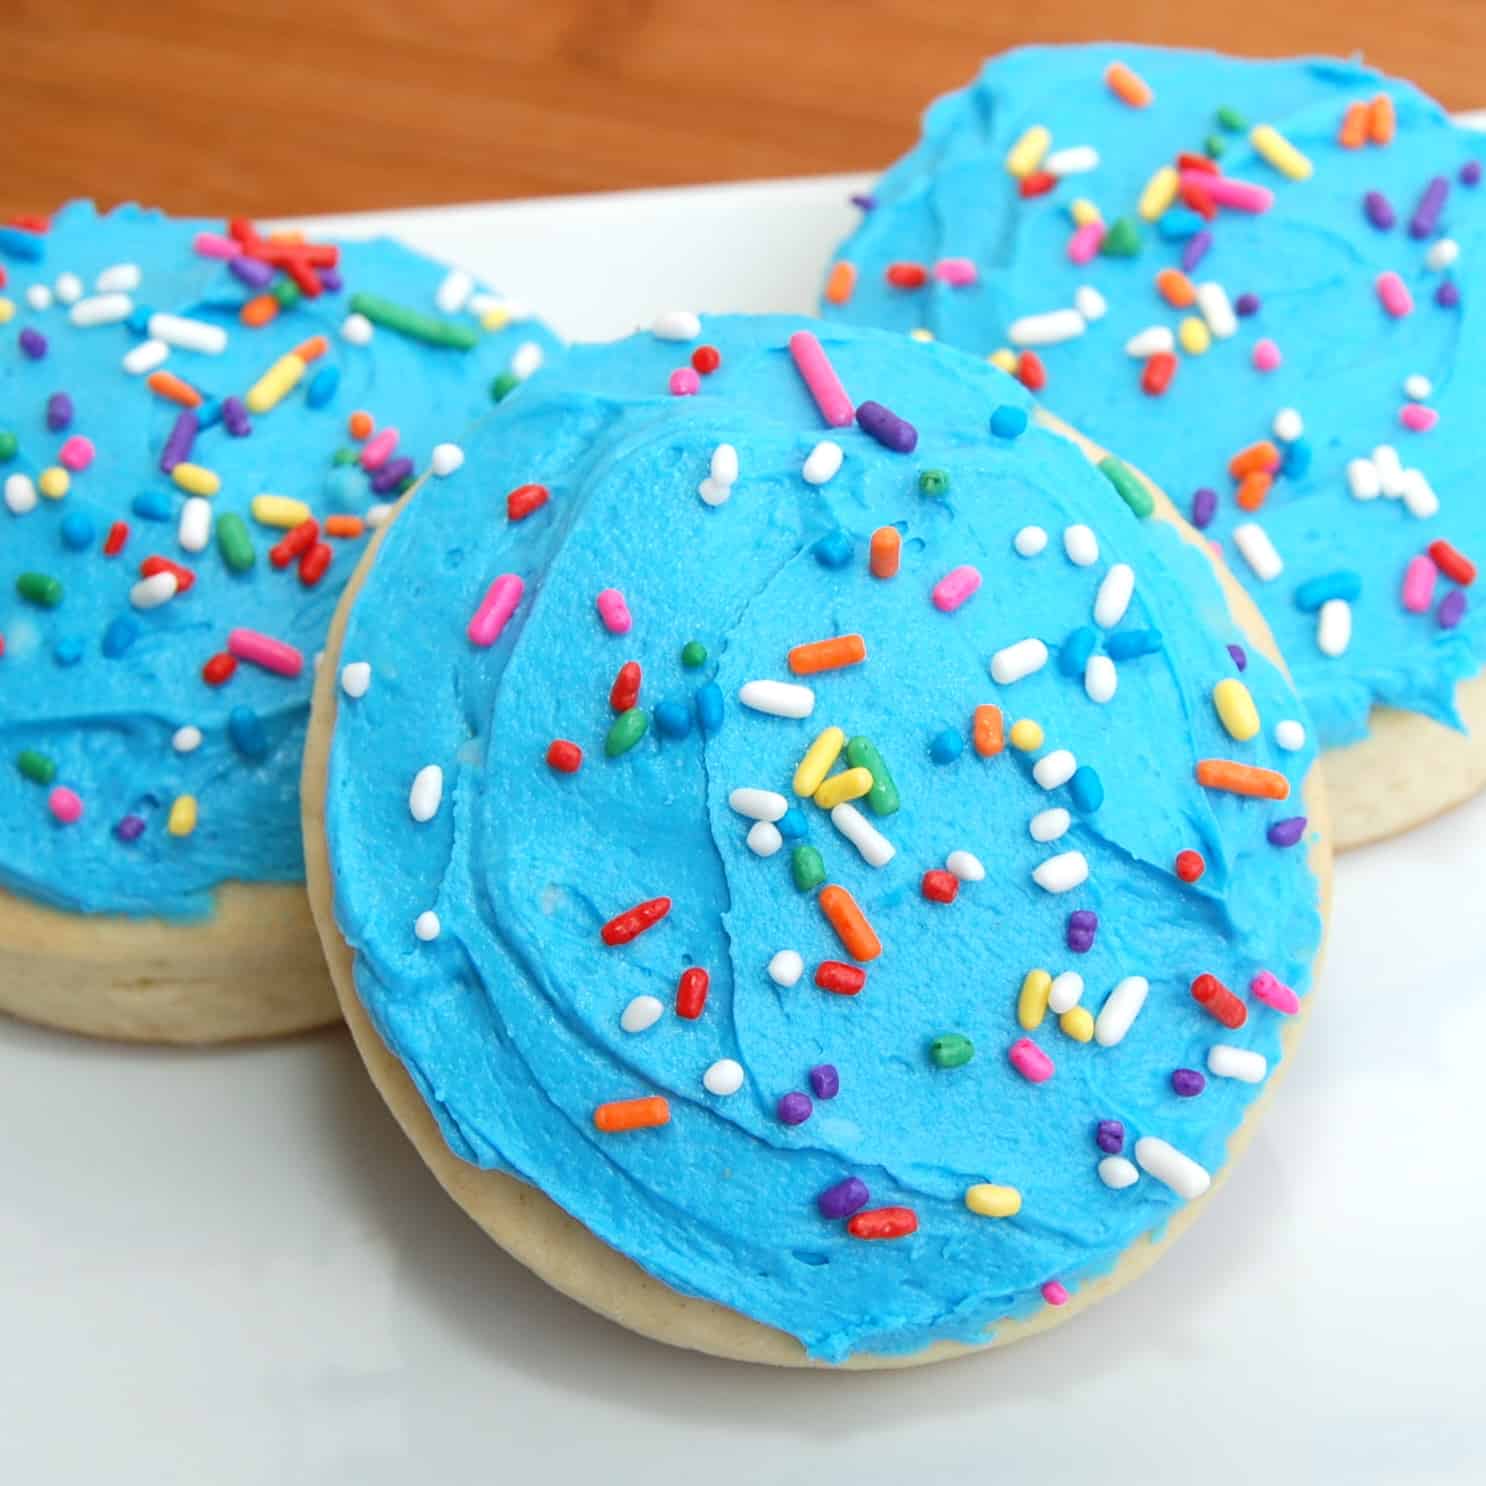 soft lofthouse cookies with blue frosting on a white plate